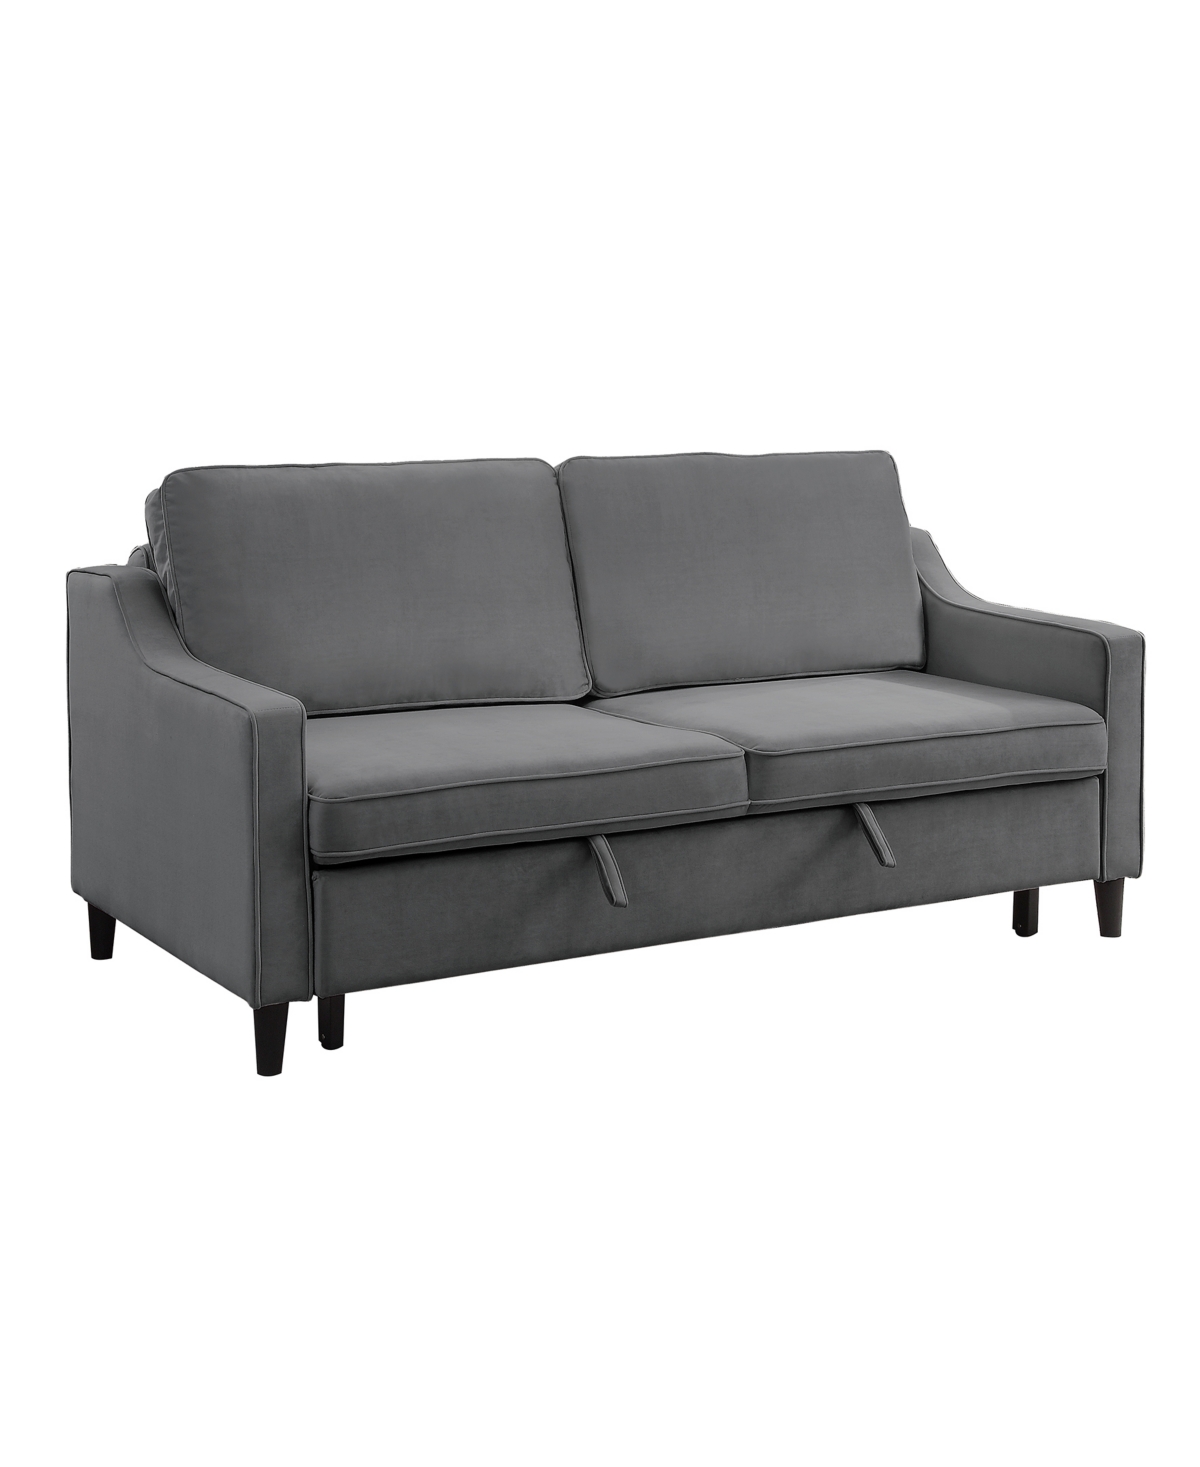 Homelegance White Label Monty Convertible 71.5" Studio Sofa With Pull-out Bed In Dark Gray